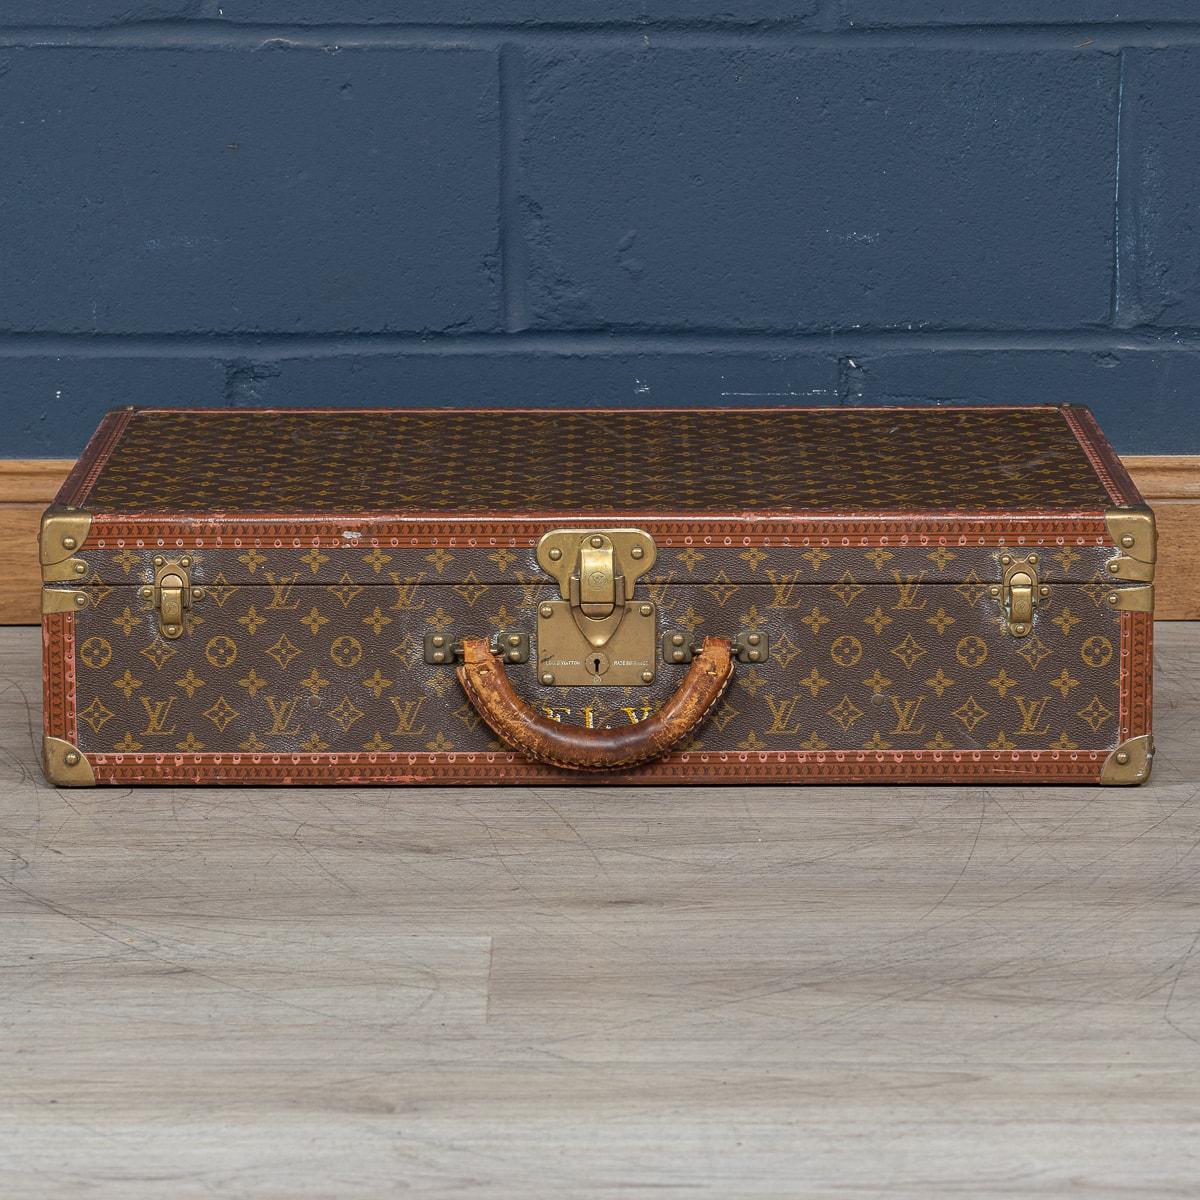 A delightful mid to late 20th-century Louis Vuitton hard-sided case, covered with the iconic monogram canvas and complemented by brass fittings. The exterior exudes the unmistakable style that has become synonymous with the renowned fashion house,